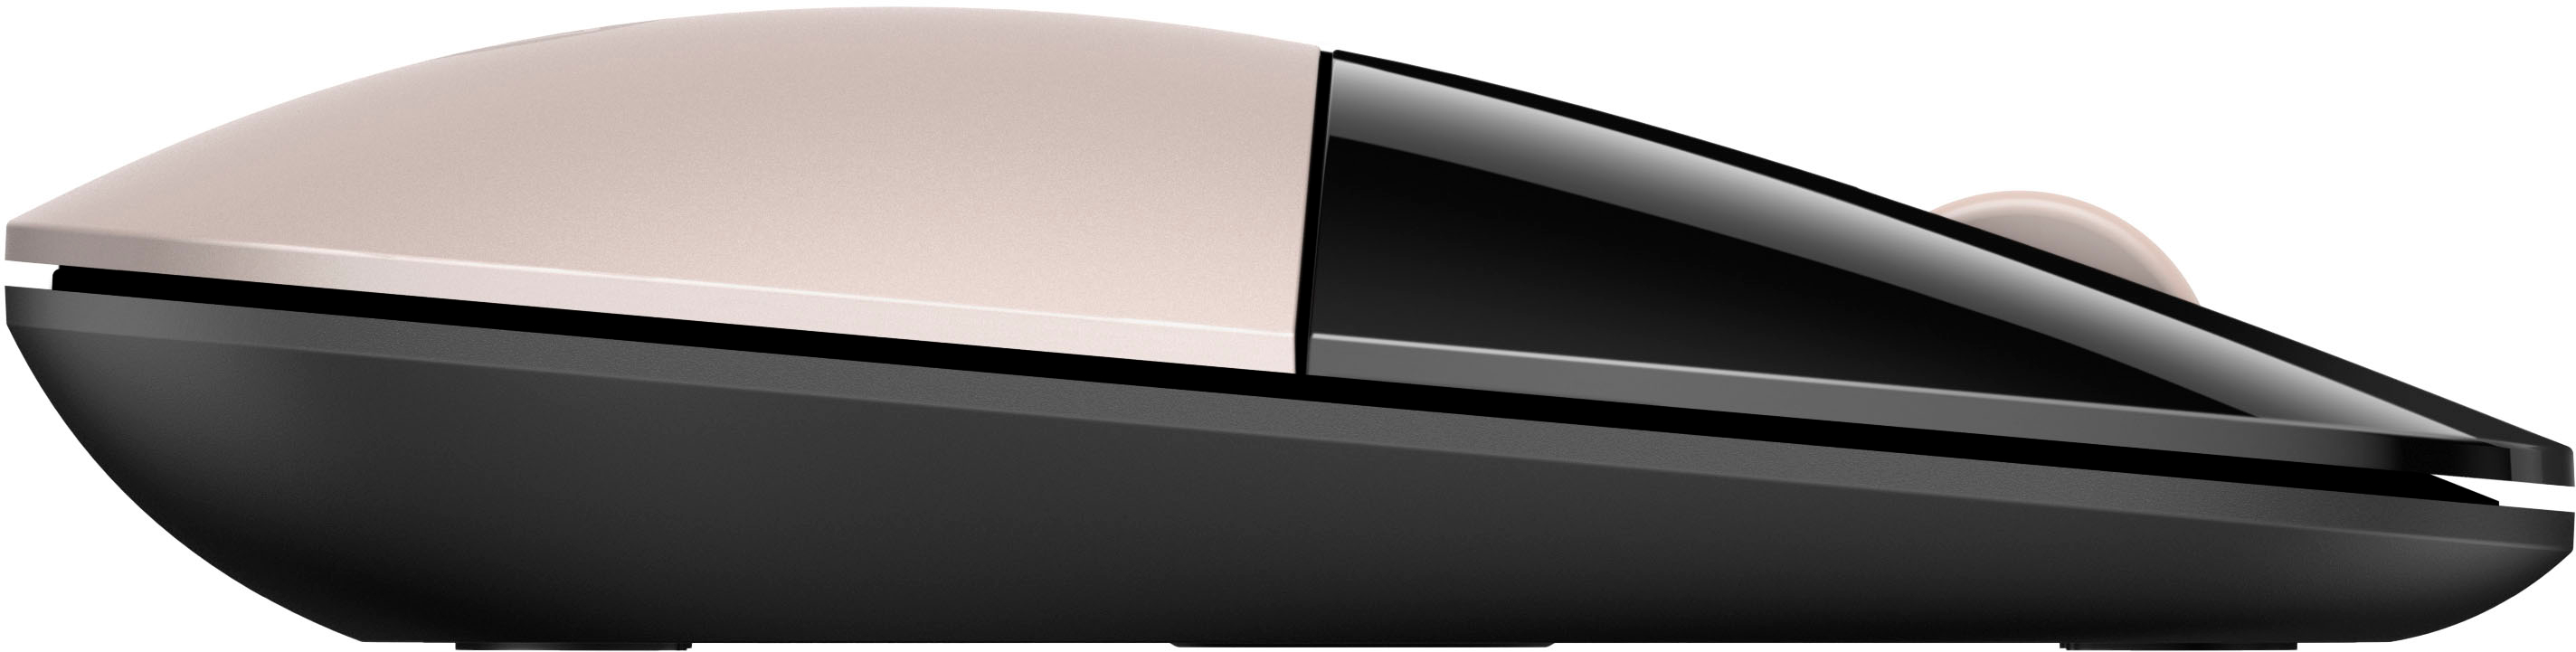 Best Buy: HP Z3700 G2 Wireless Optical Ambidextrous Mouse Rose Gold  66Z12AA#ABL